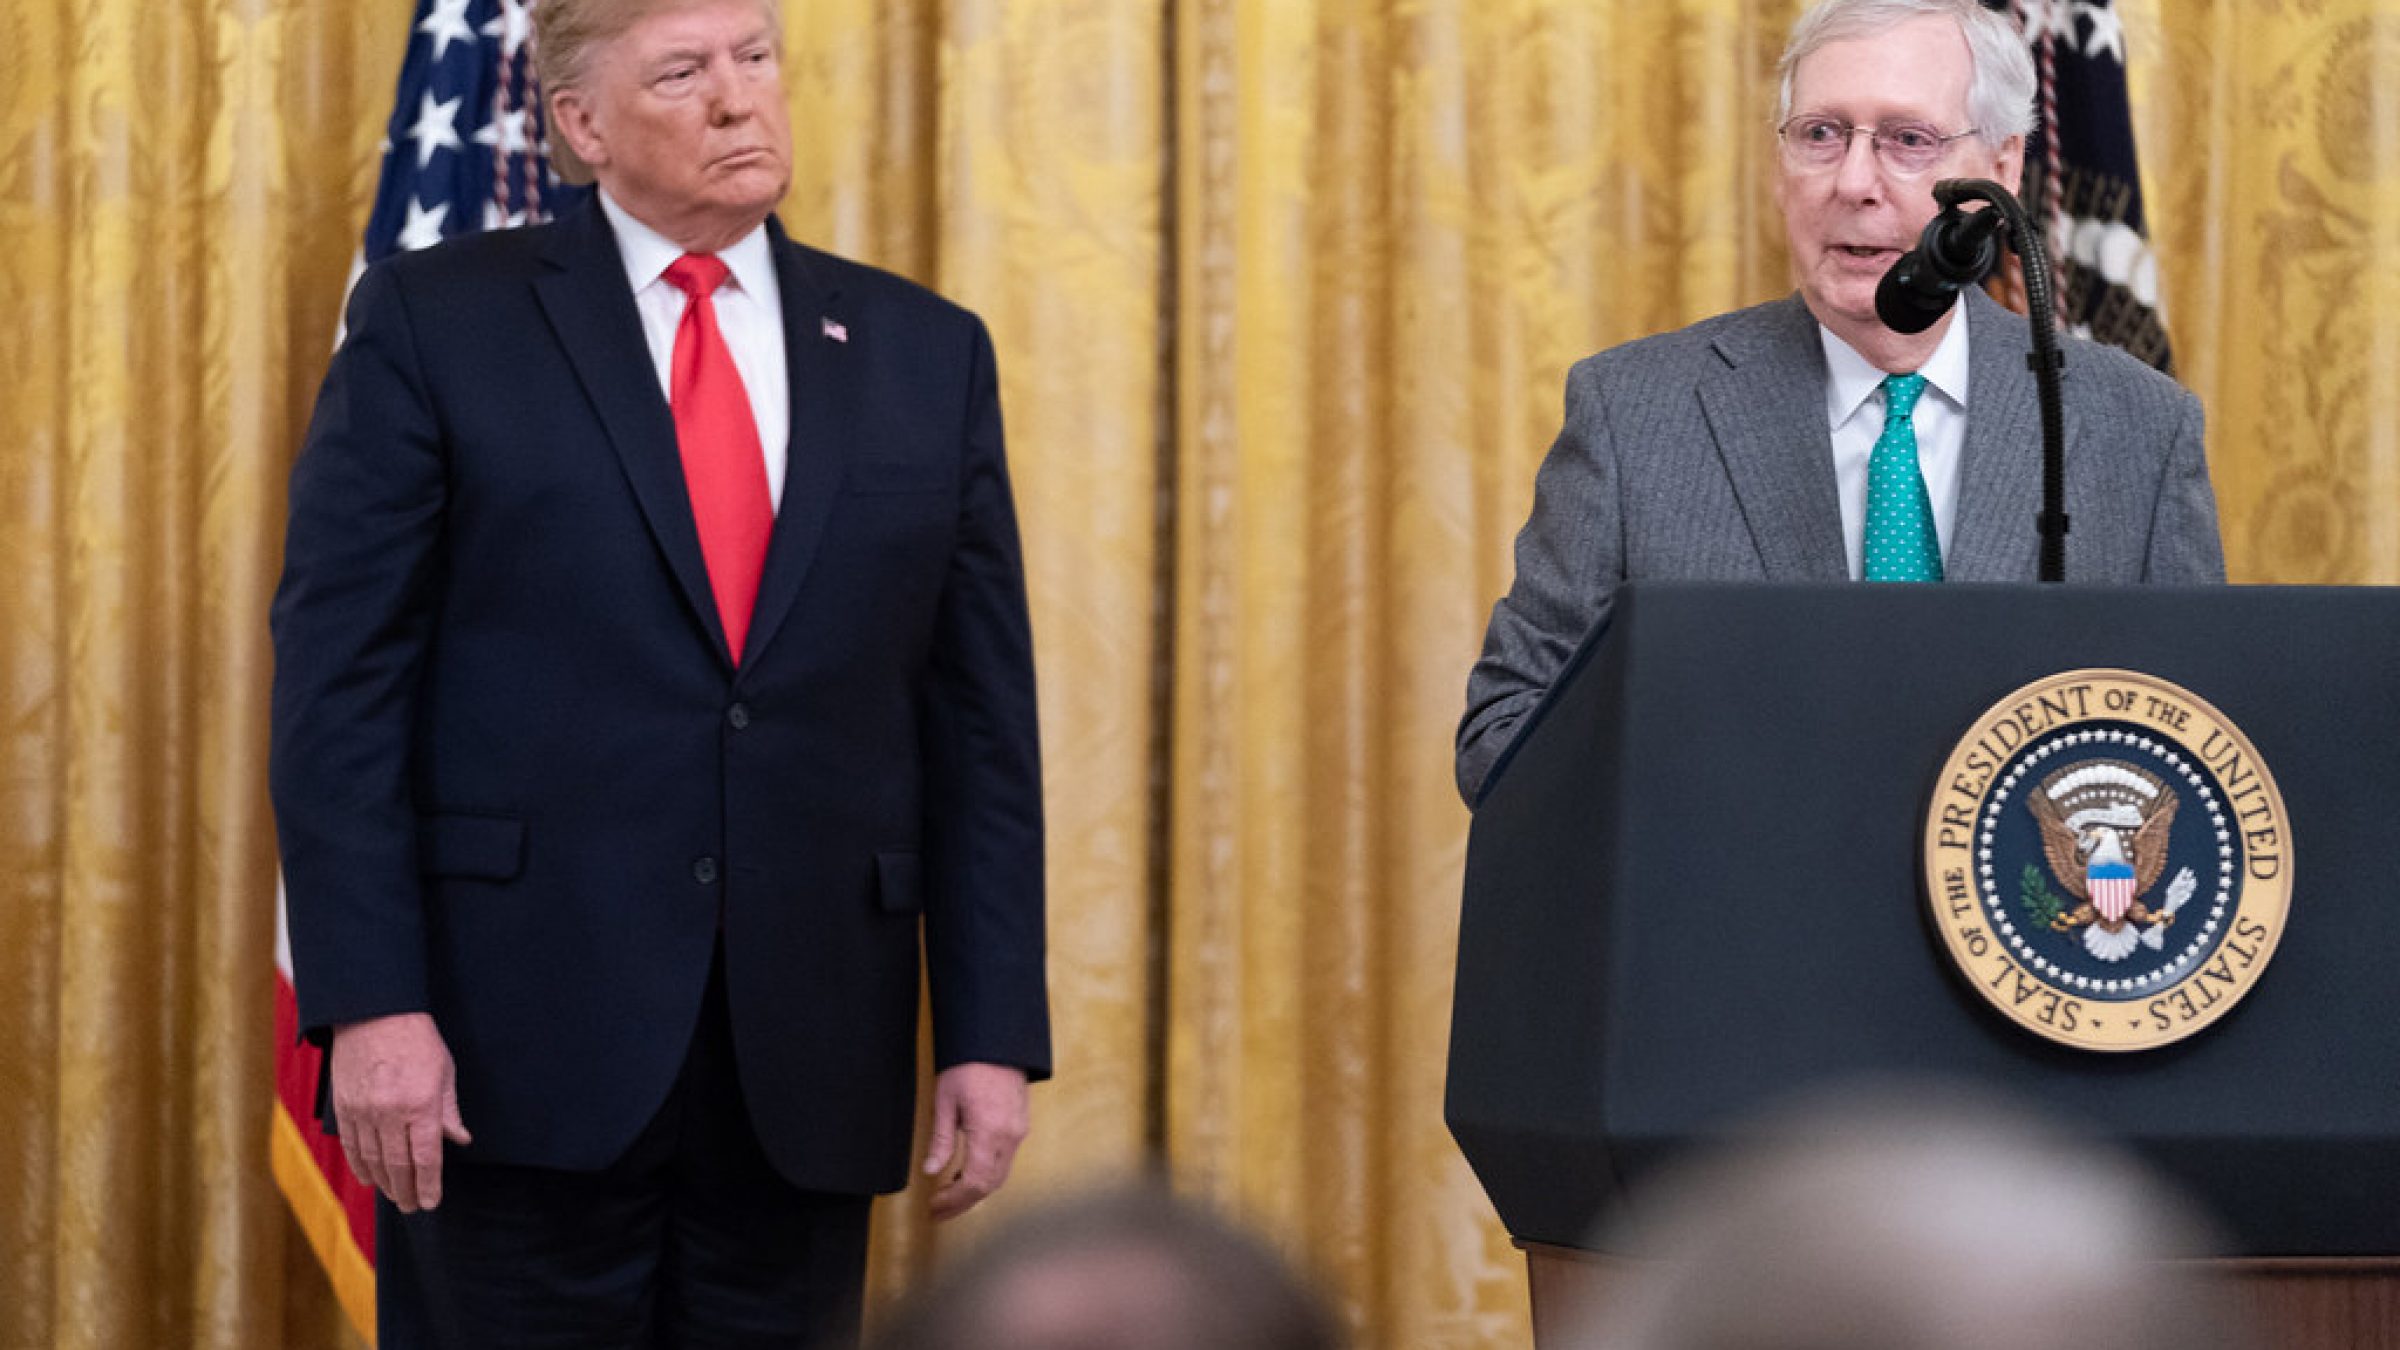 Trump with Mitch McConnell